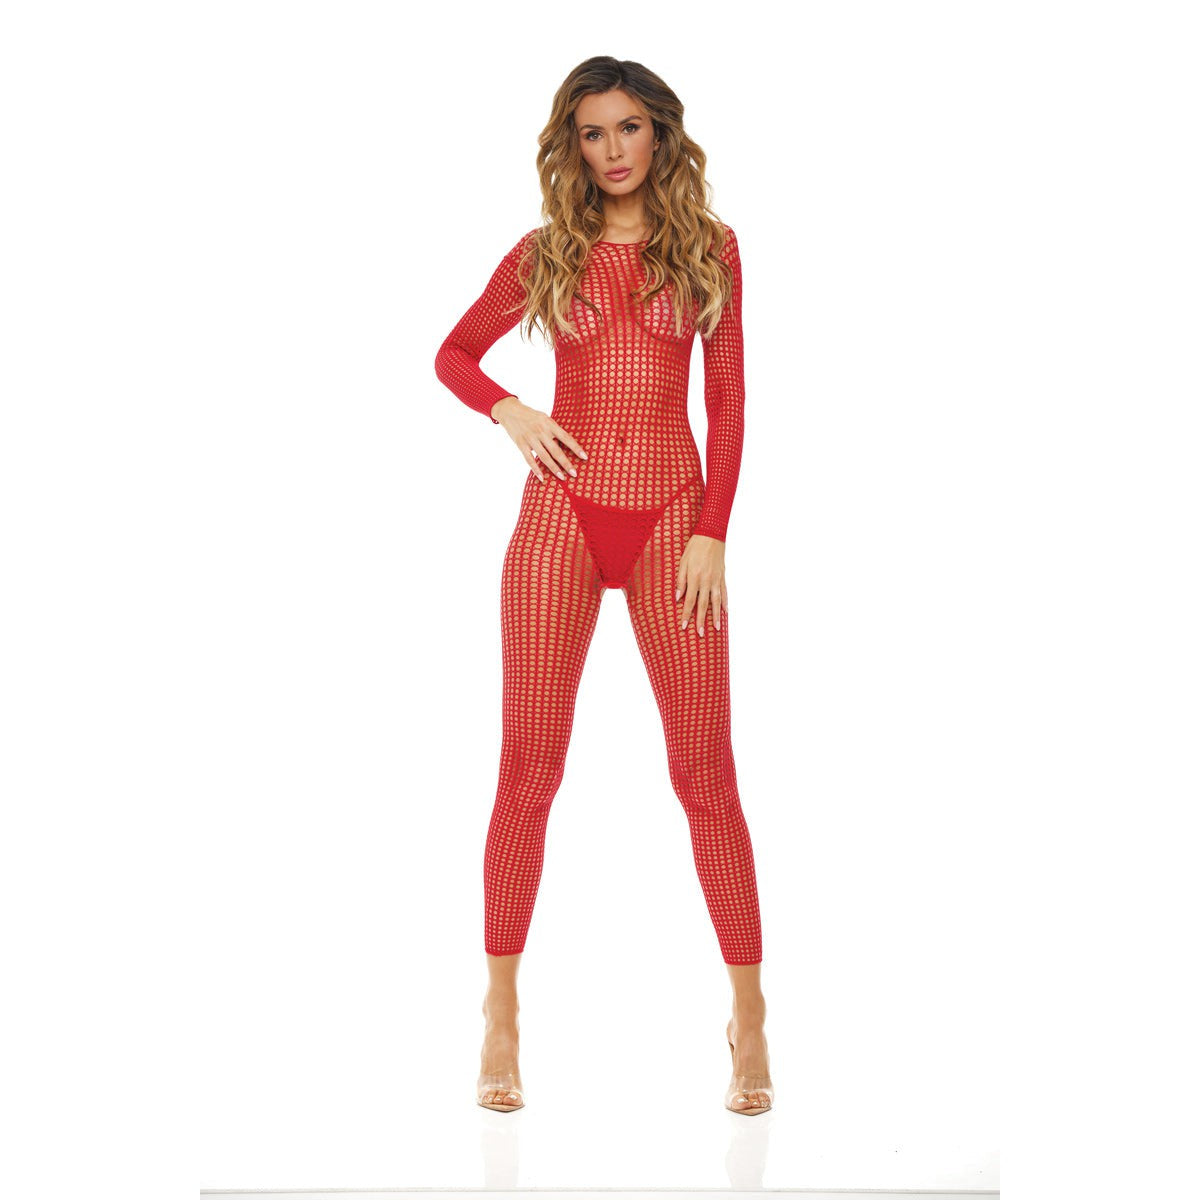 Crotchless Bodystocking - One Size - Red